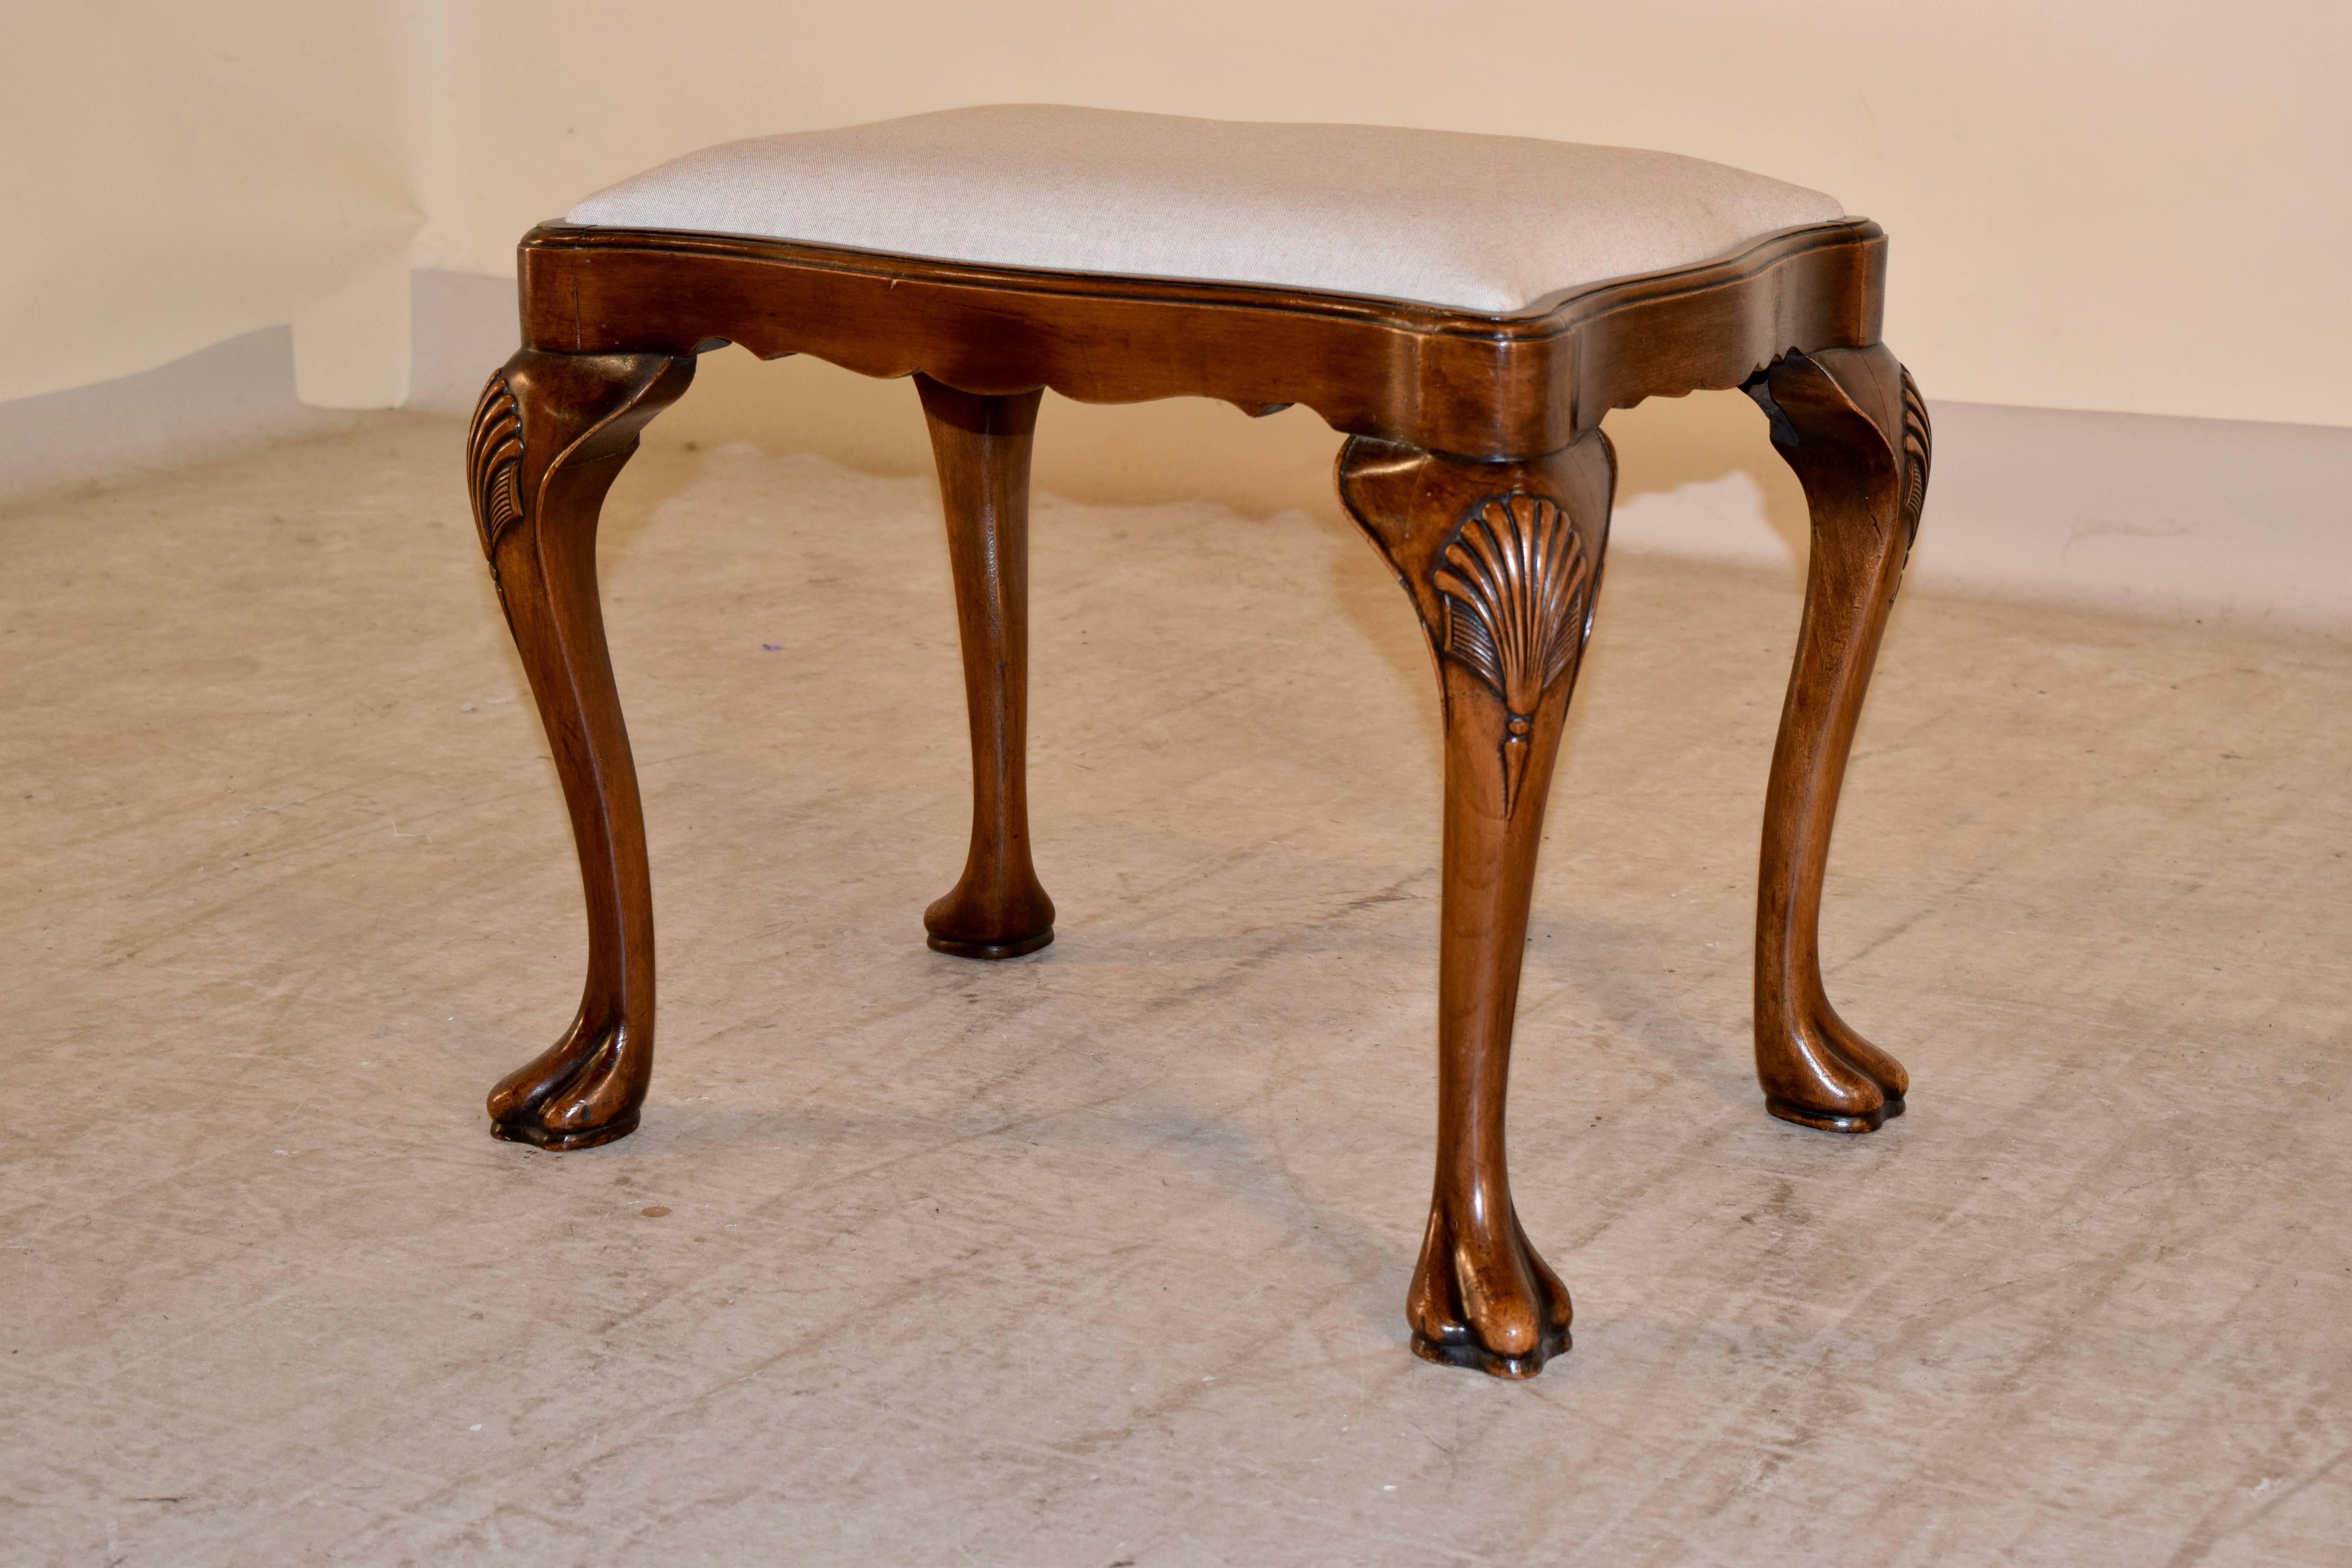 19th century English stool made from walnut. The seat has been newly upholstered in linen and is serpentine in shape, following down to a wonderfully hand scalloped apron and graceful cabriole shaped legs with carved shells on the knees and ending